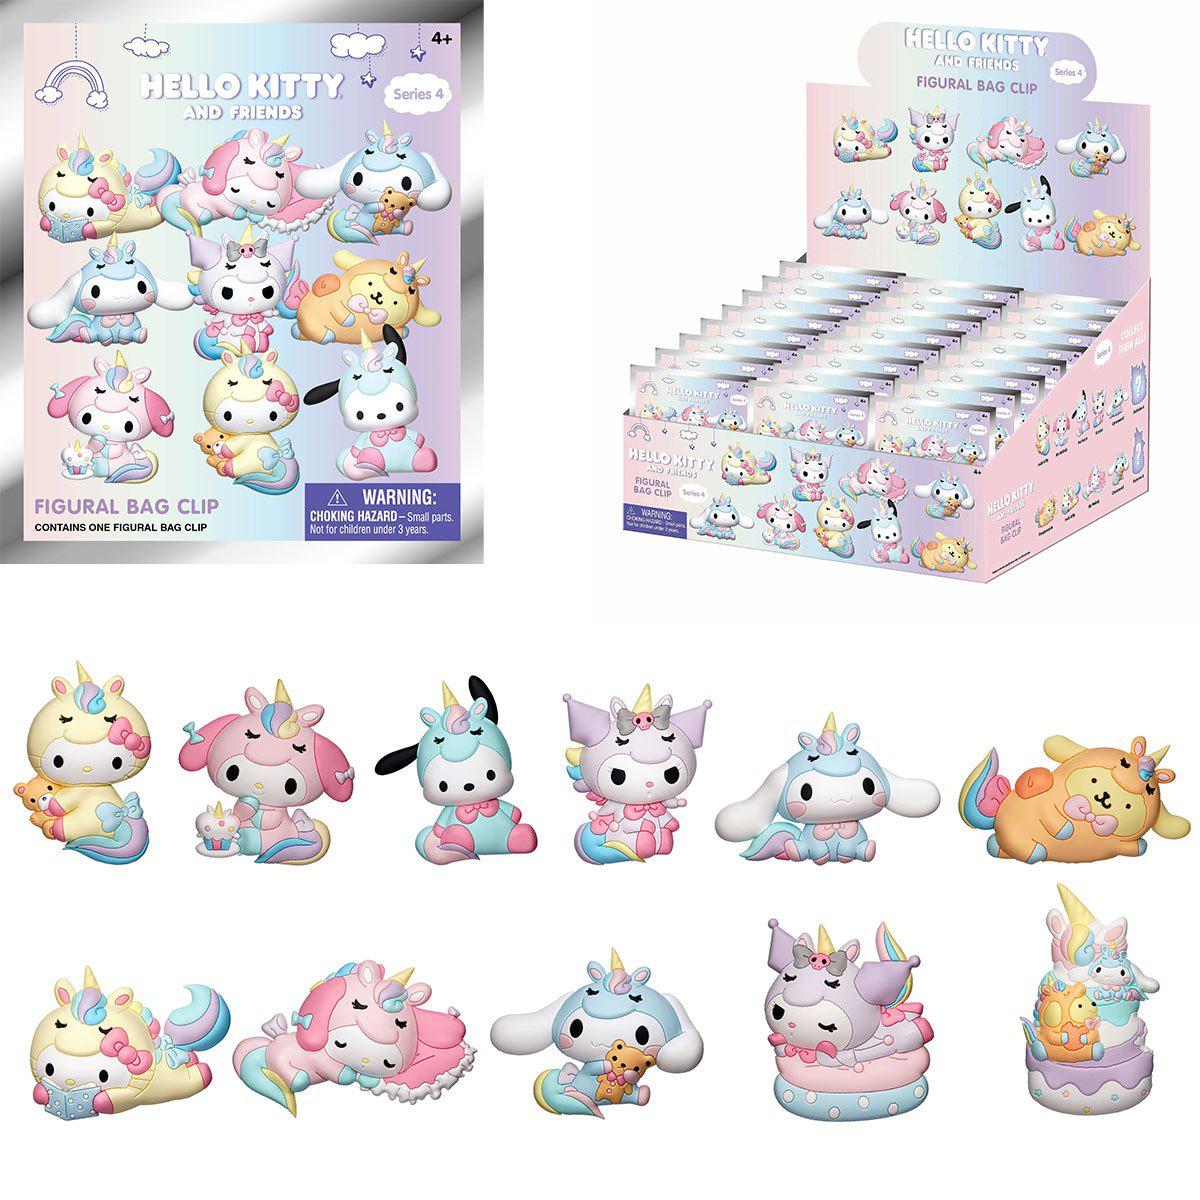 Monogram-3D Foam Collectible Bag Clips - Hello Kitty & Friends Series 4-78125-Legacy Toys